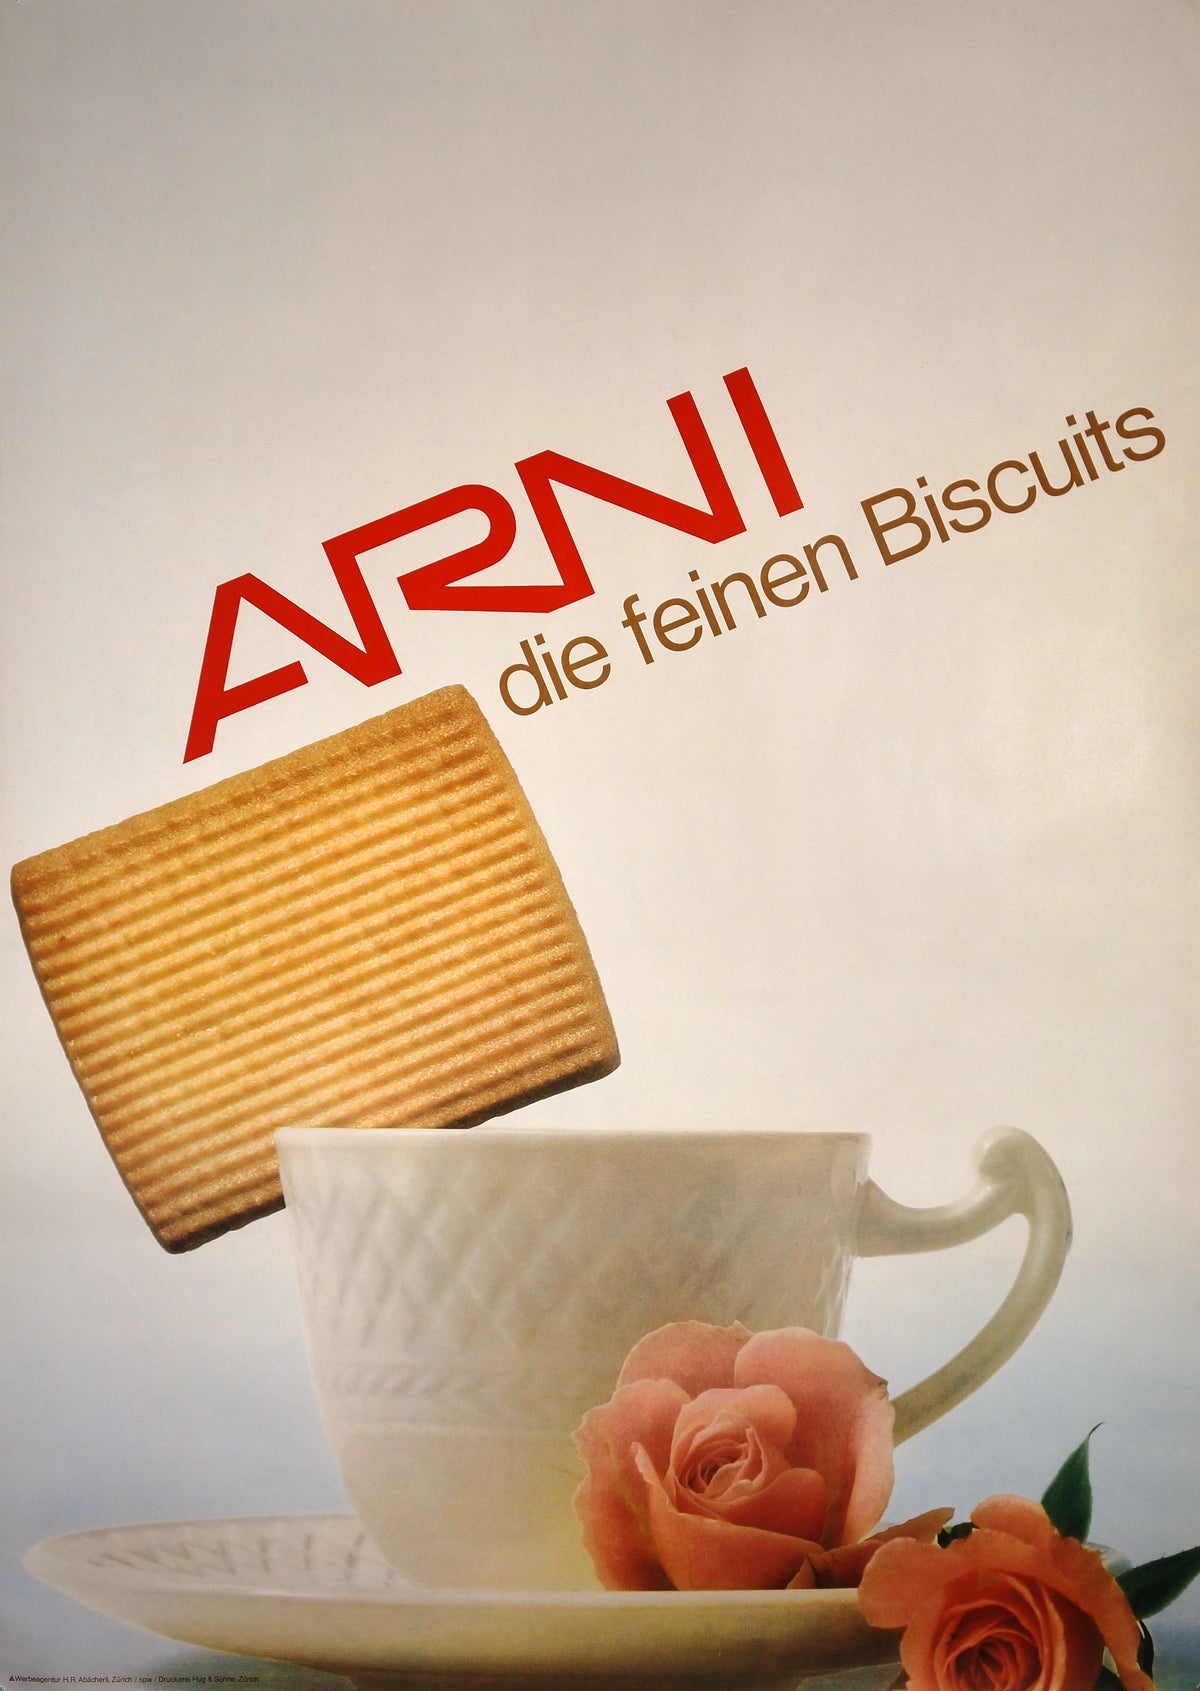 ARNI Biscuits - Authentic Vintage Poster